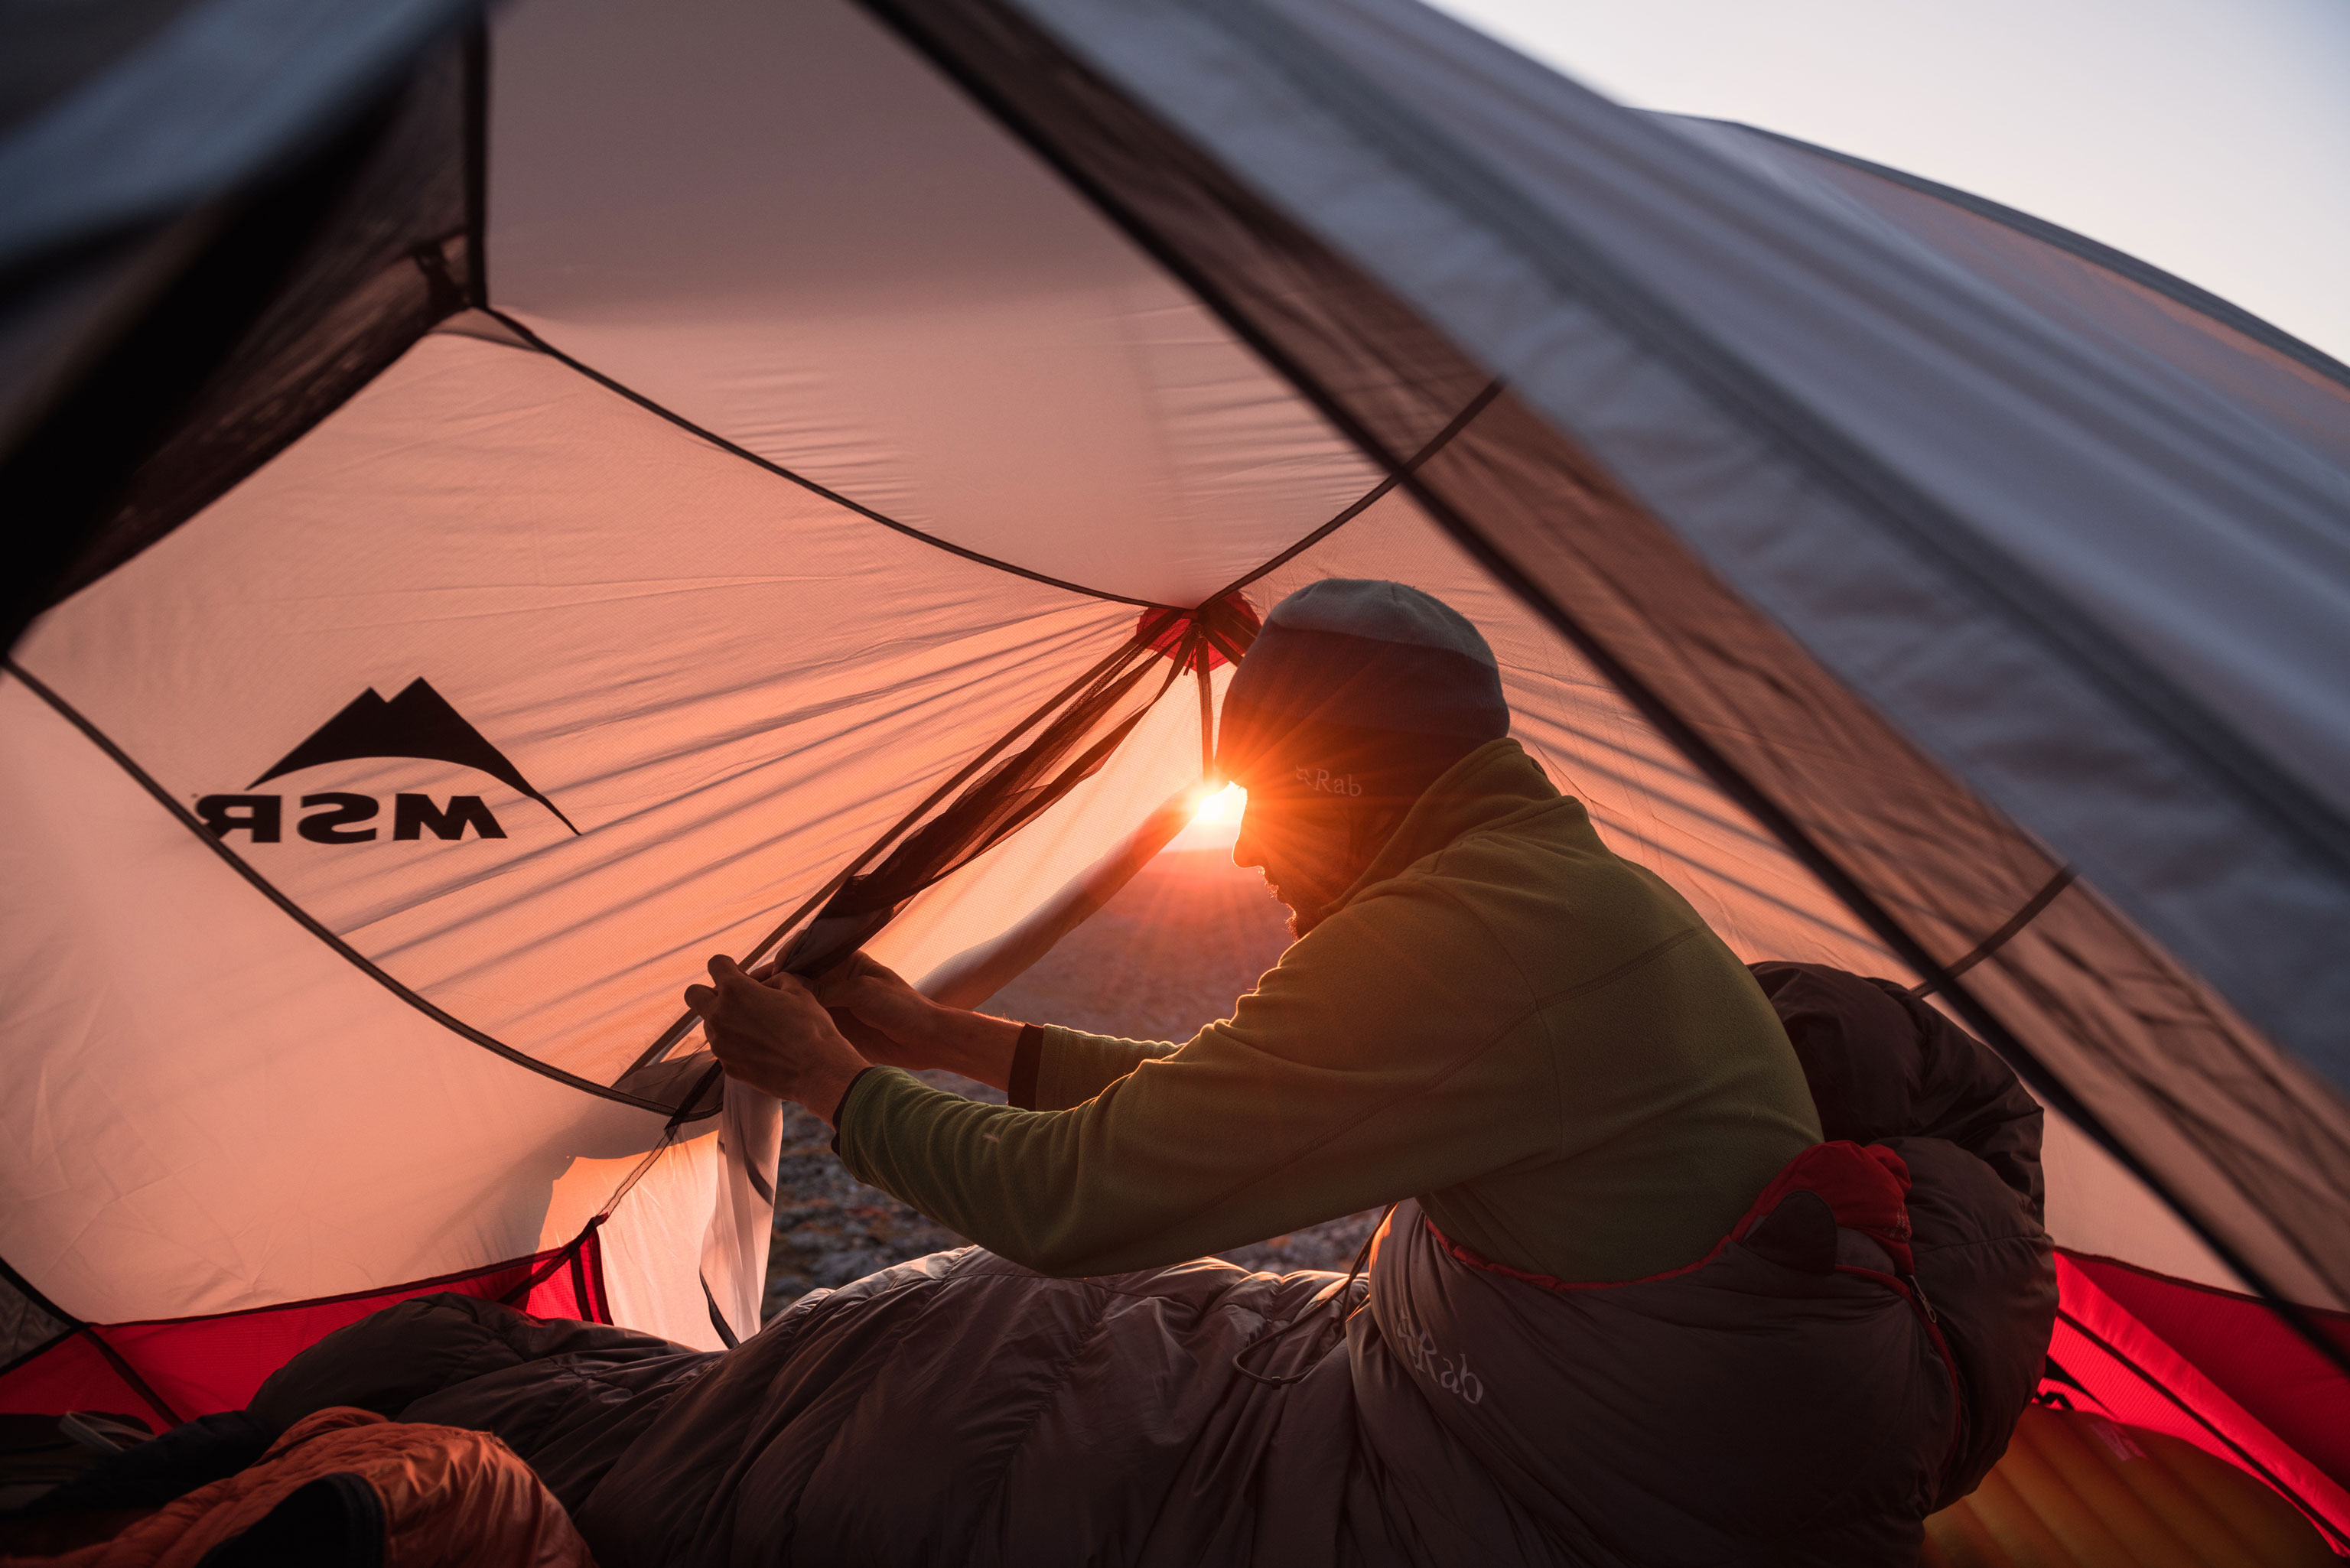 A hiker opens the tent at sunrise